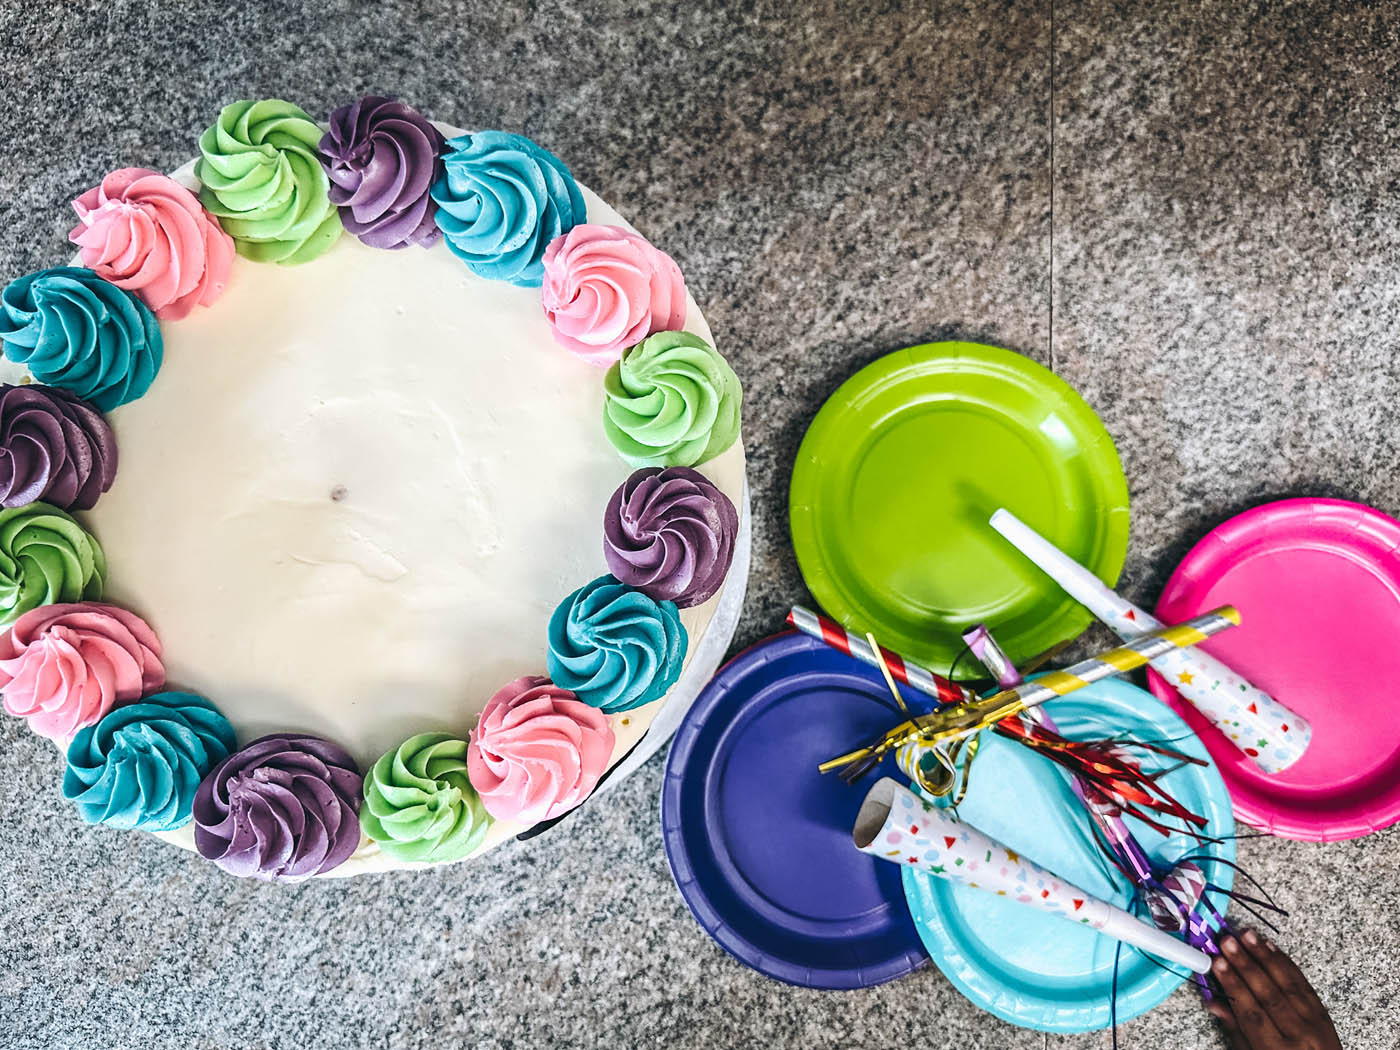 A cake and party supplies - party utensil supplies provided at Romp n' Roll toddler birthday venues in Glen Allen, VA.